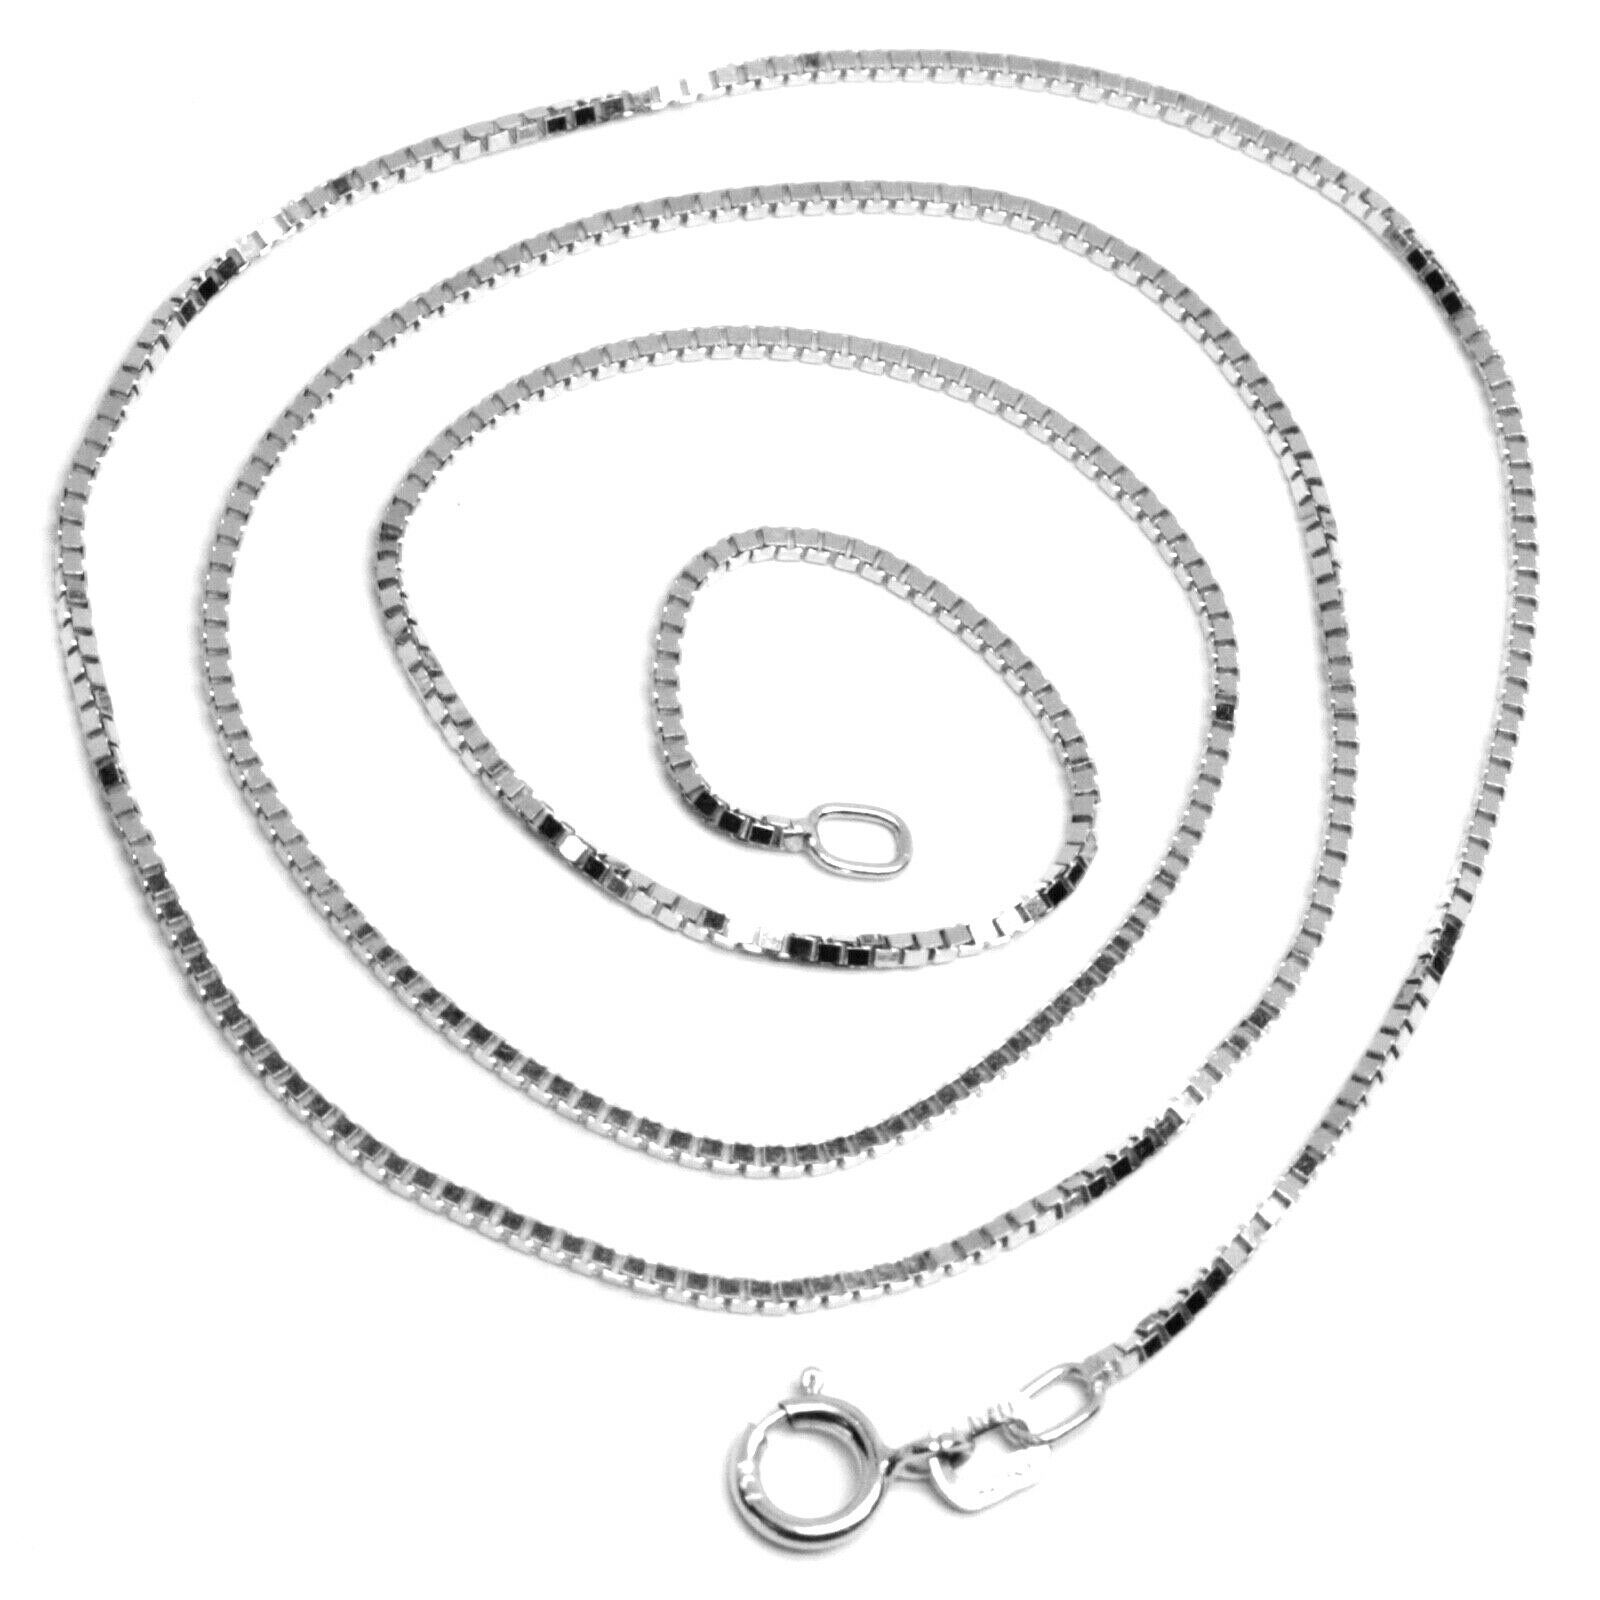 Primary image for SOLID 18K WHITE GOLD CHAIN 1.1 MM VENETIAN SQUARE BOX 23.6", 60 cm, ITALY MADE